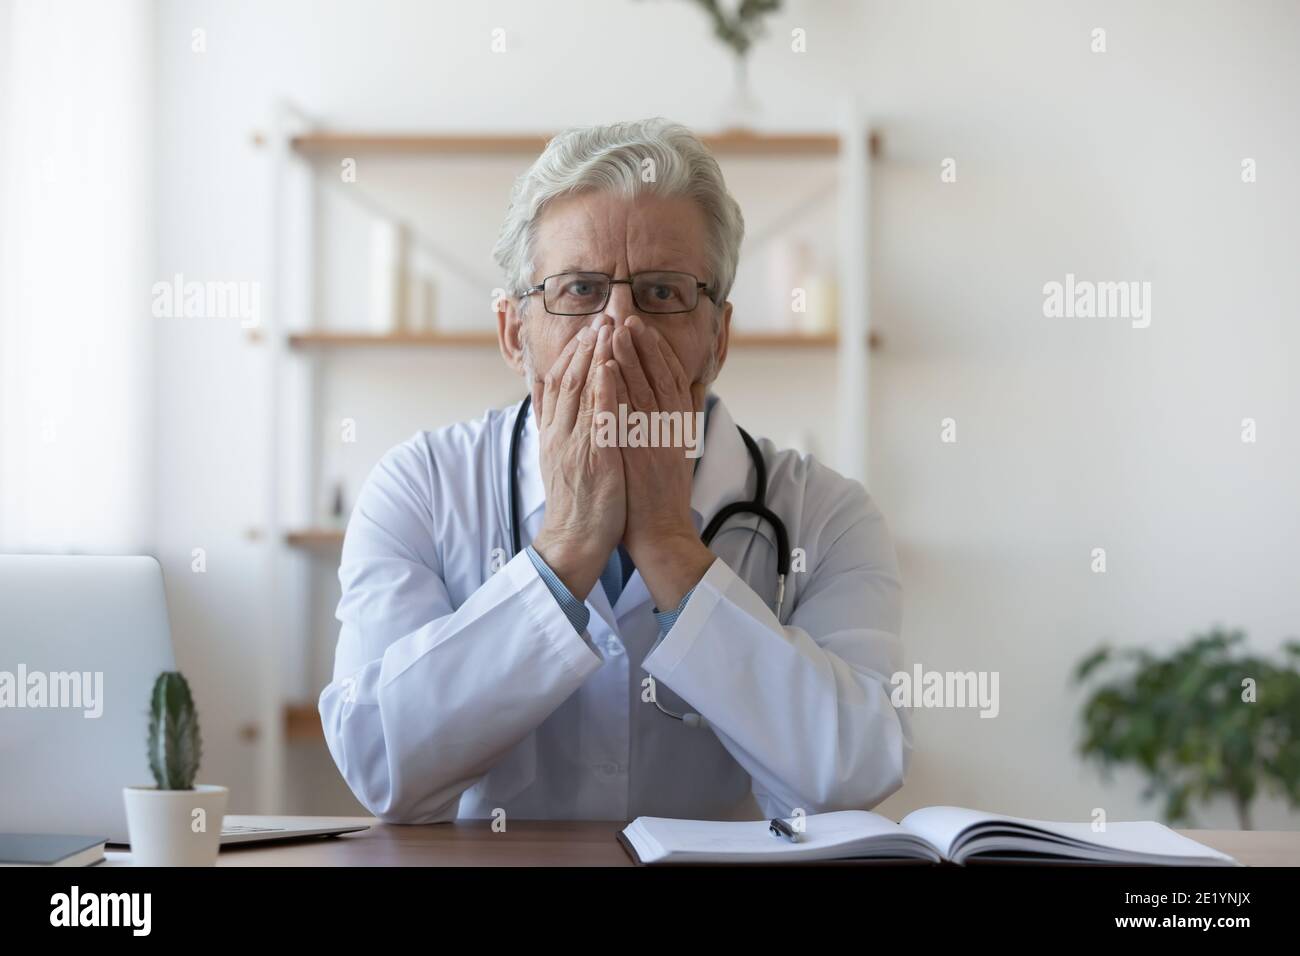 Confused old mature doctor therapist regretting diagnosis mistake. Stock Photo